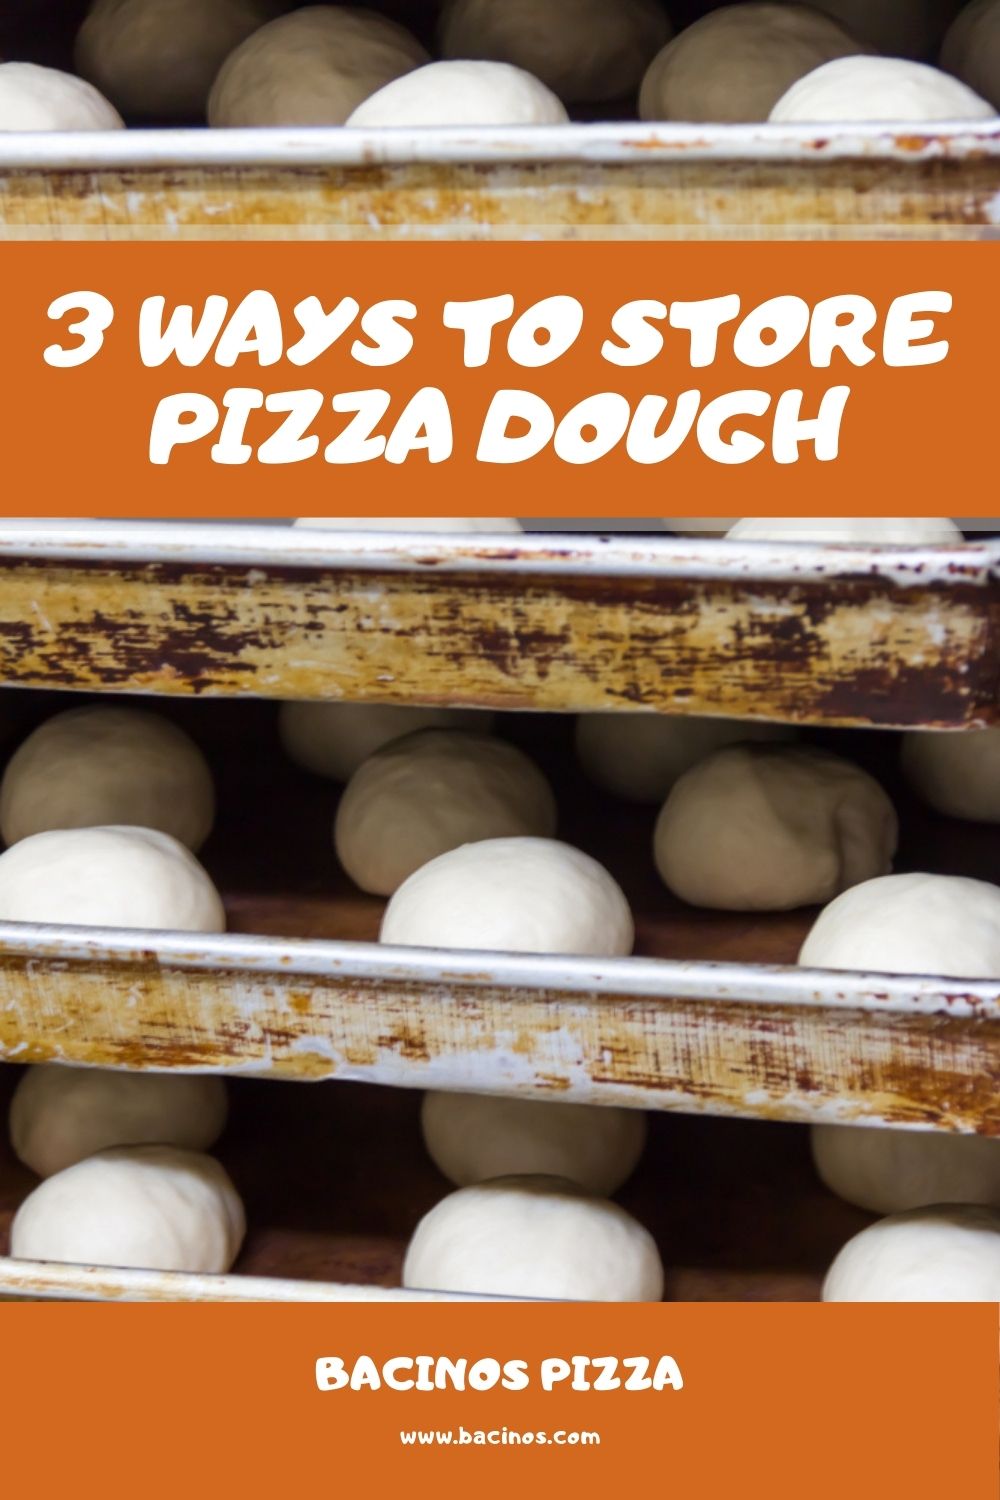 3 Ways to Store Pizza Dough 1